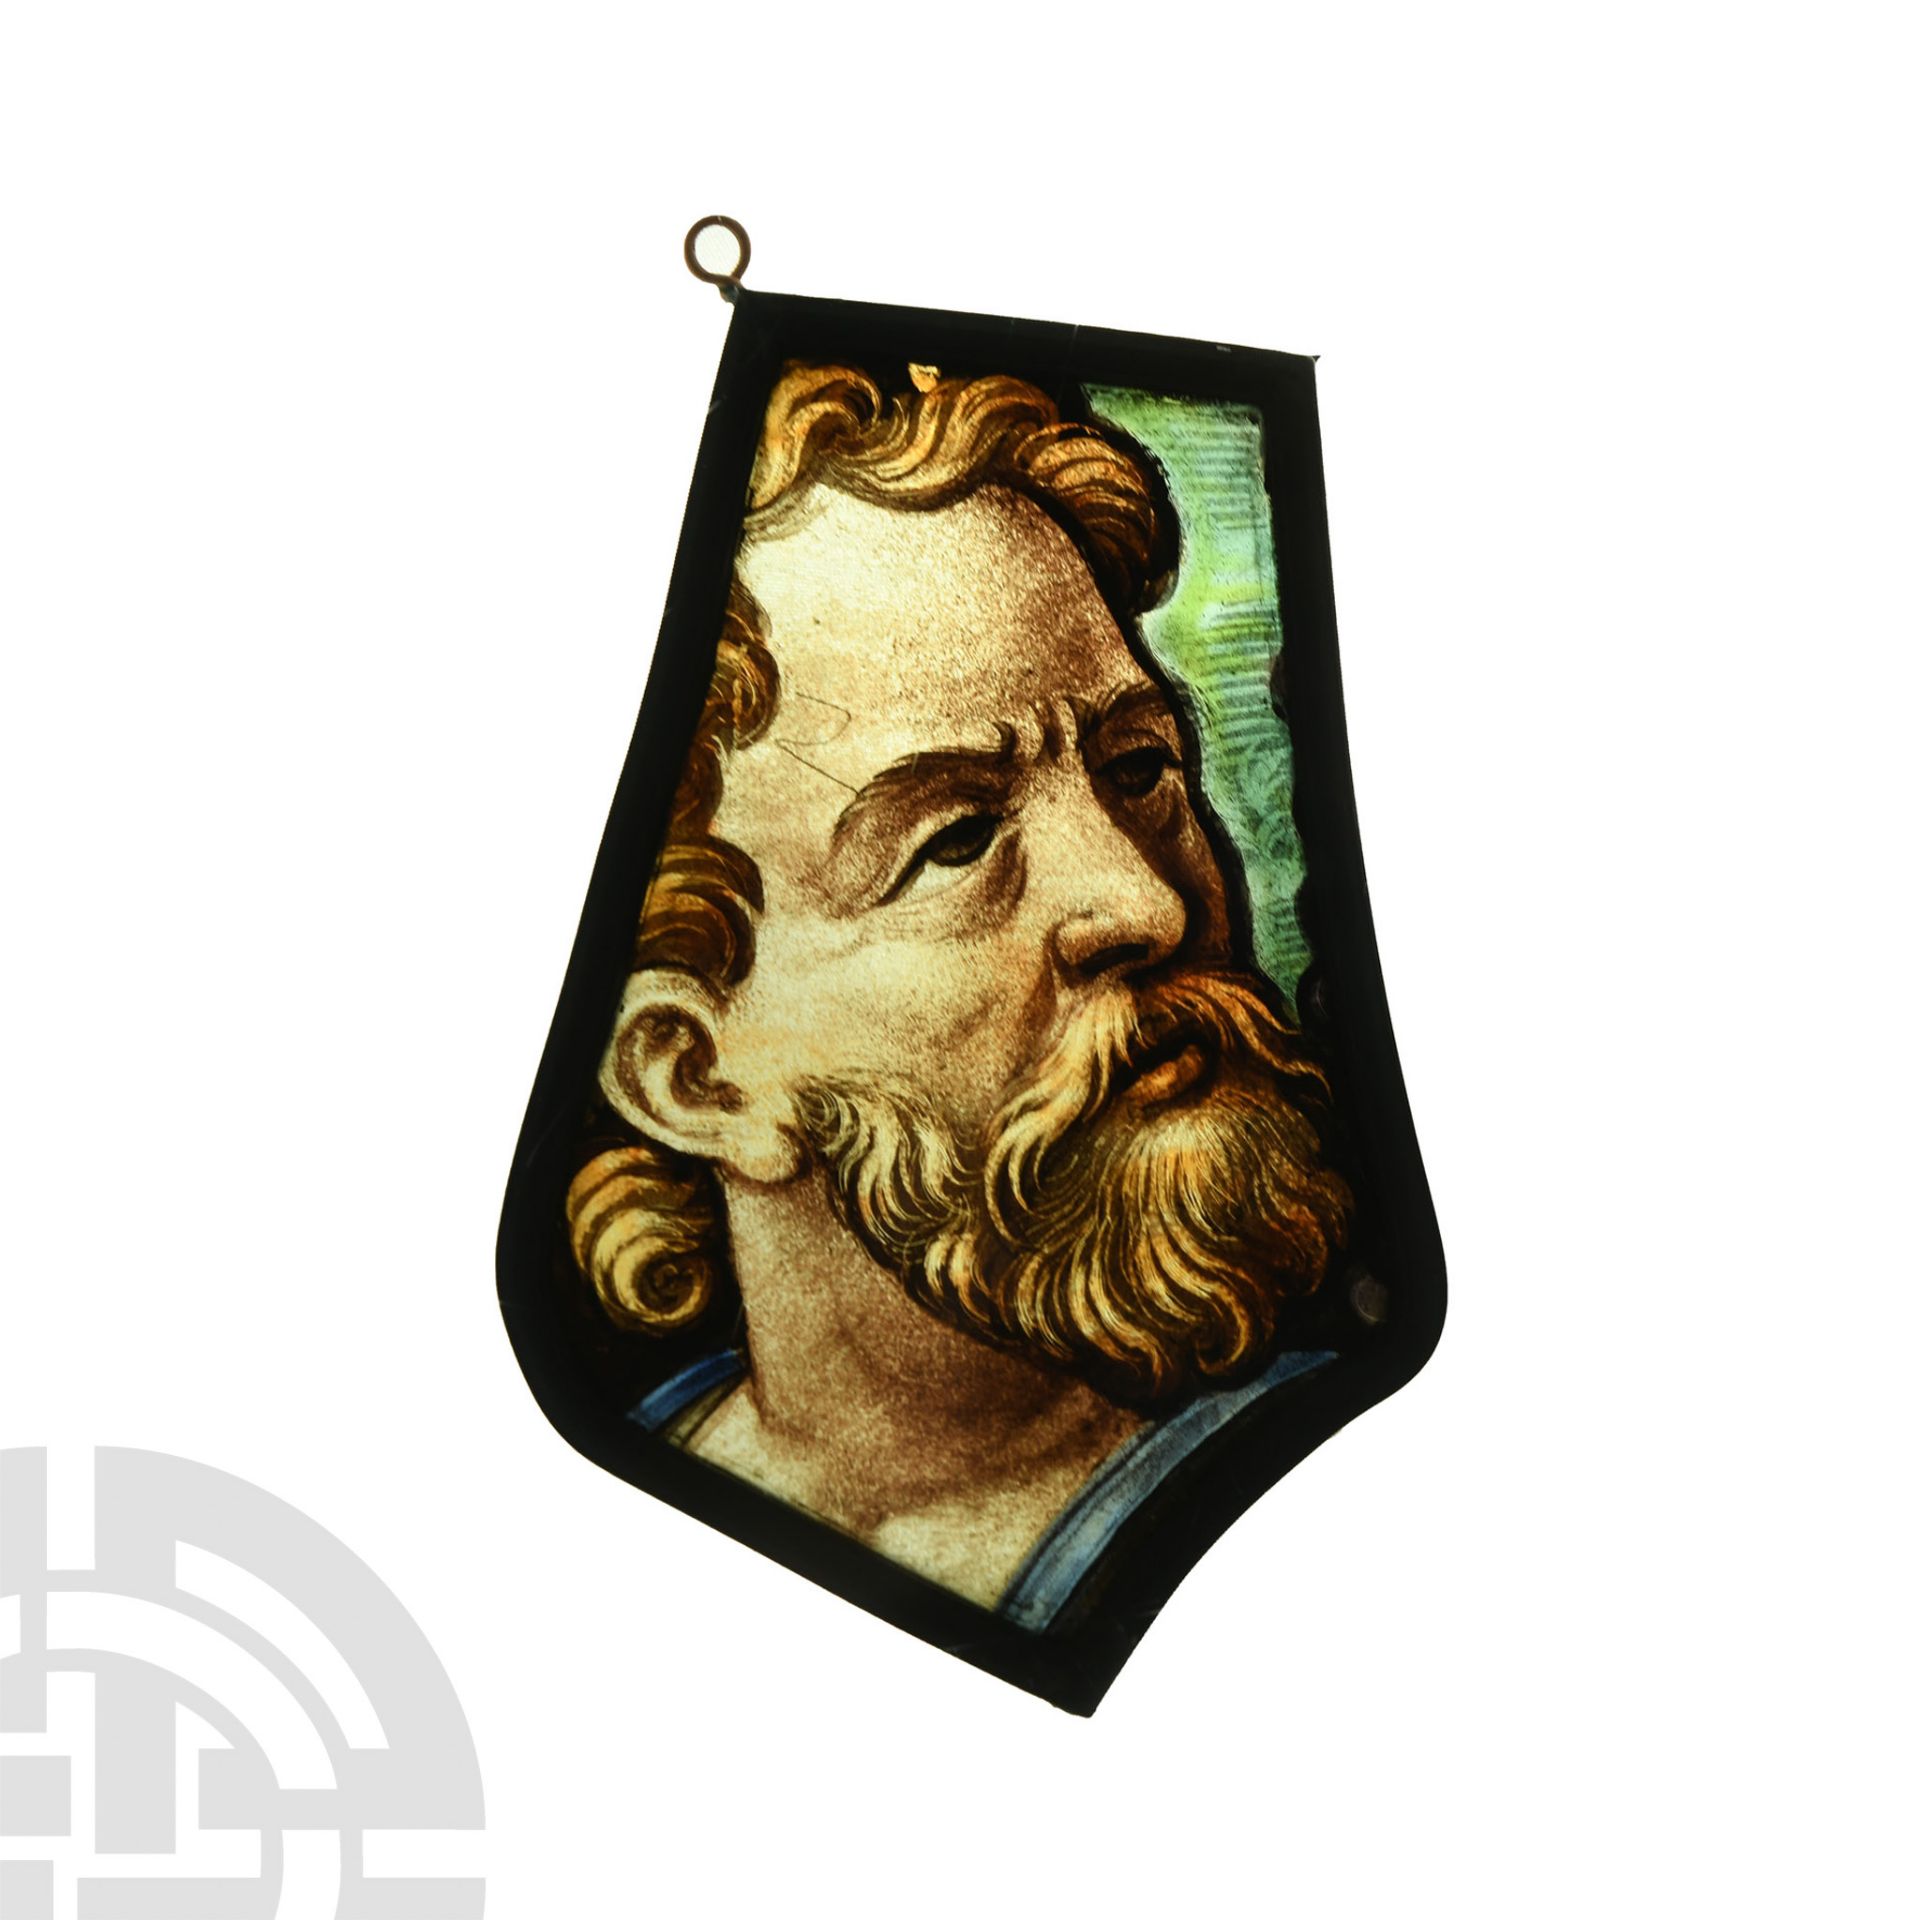 Renaissance Stained Glass Panel of a Bearded Man